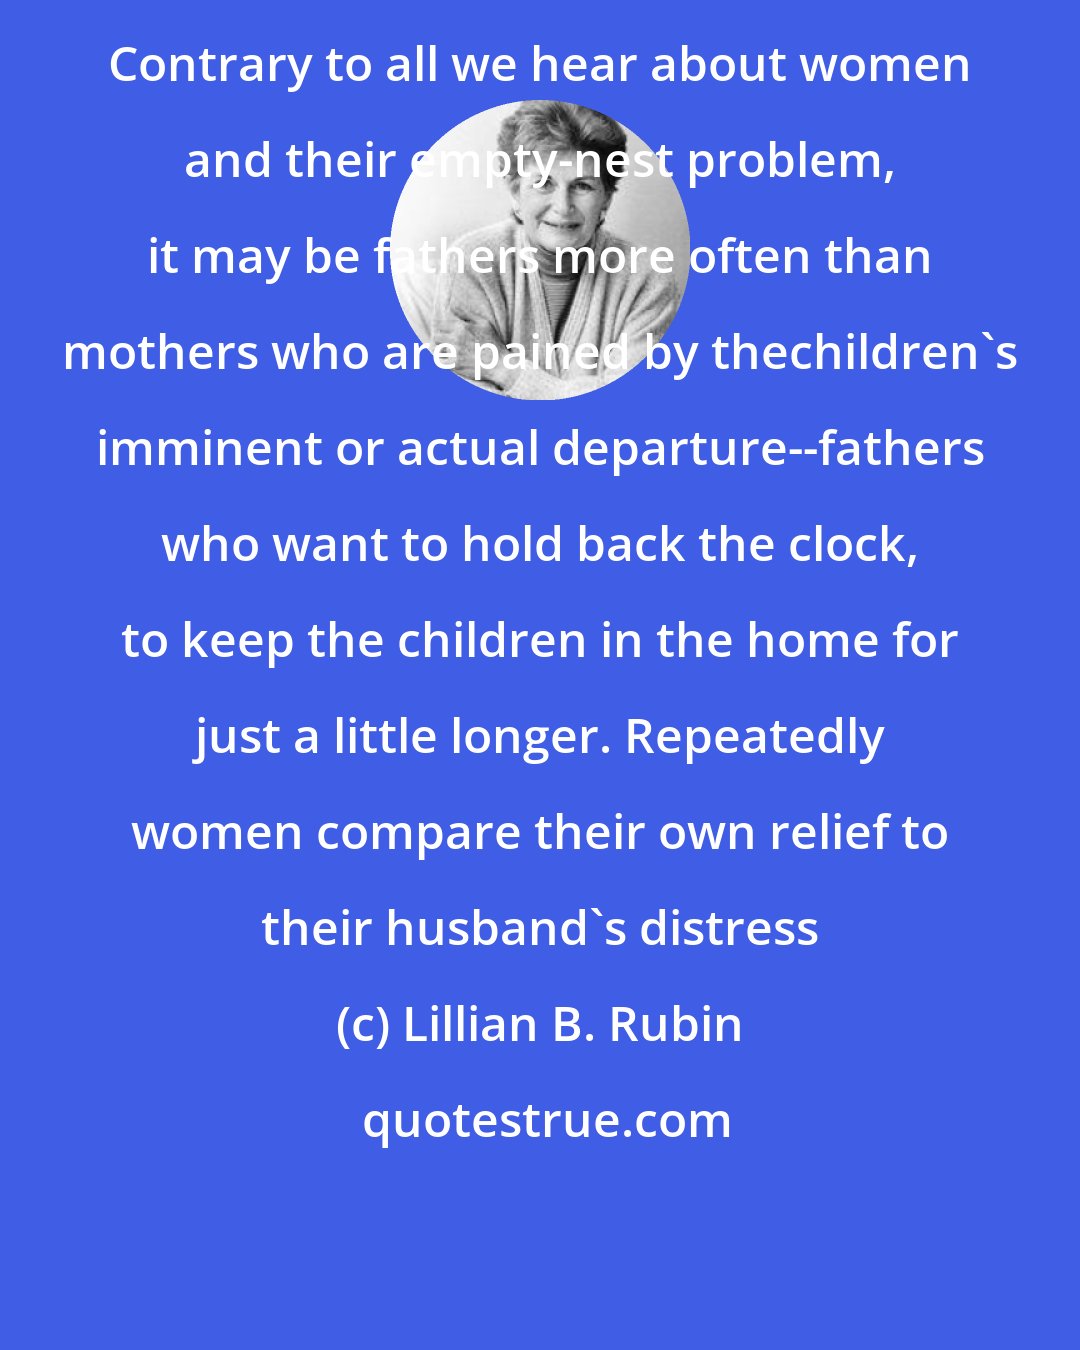 Lillian B. Rubin: Contrary to all we hear about women and their empty-nest problem, it may be fathers more often than mothers who are pained by thechildren's imminent or actual departure--fathers who want to hold back the clock, to keep the children in the home for just a little longer. Repeatedly women compare their own relief to their husband's distress